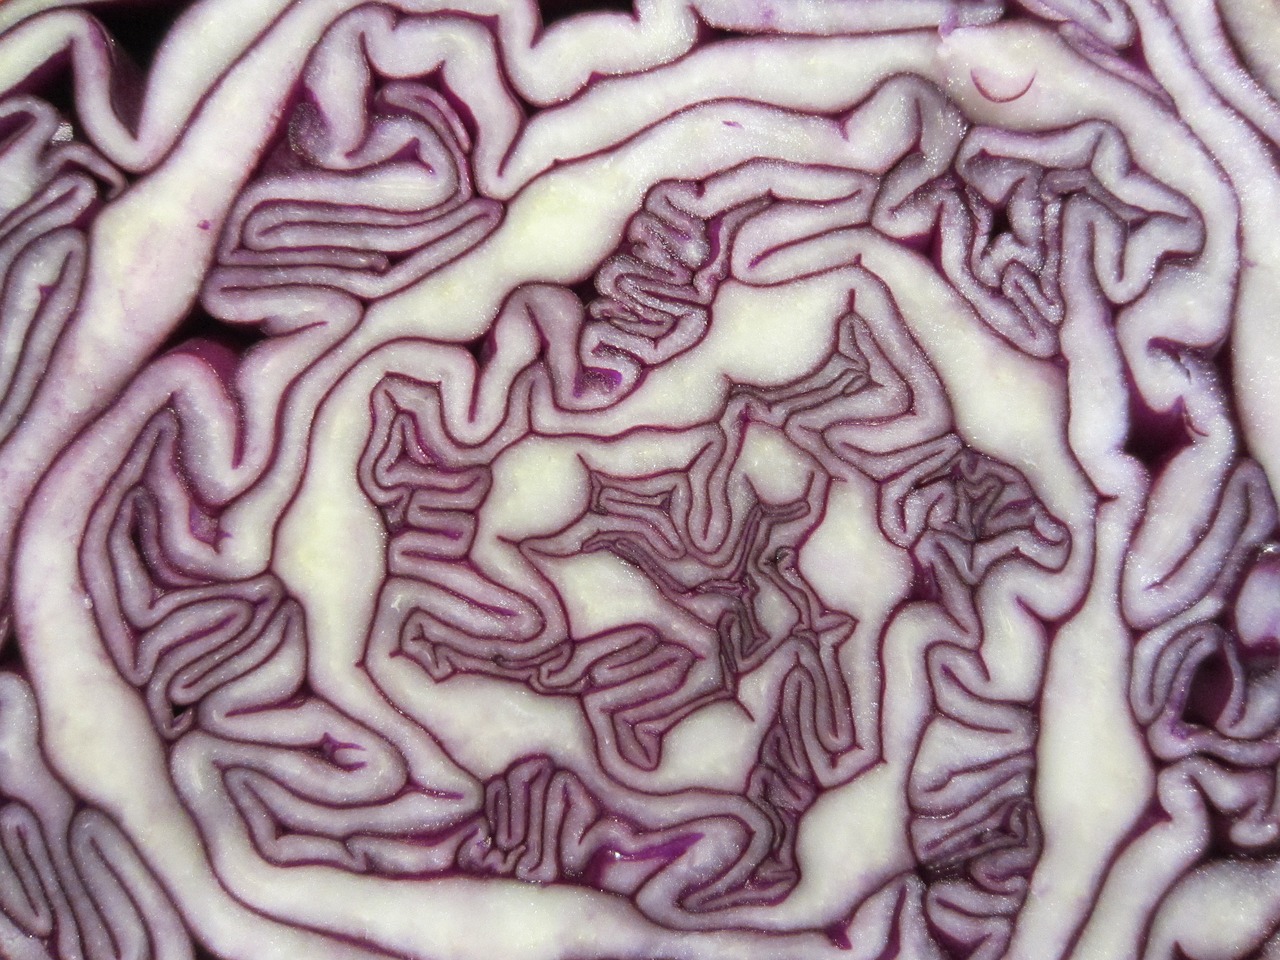 Colorful Red Cabbage Salad